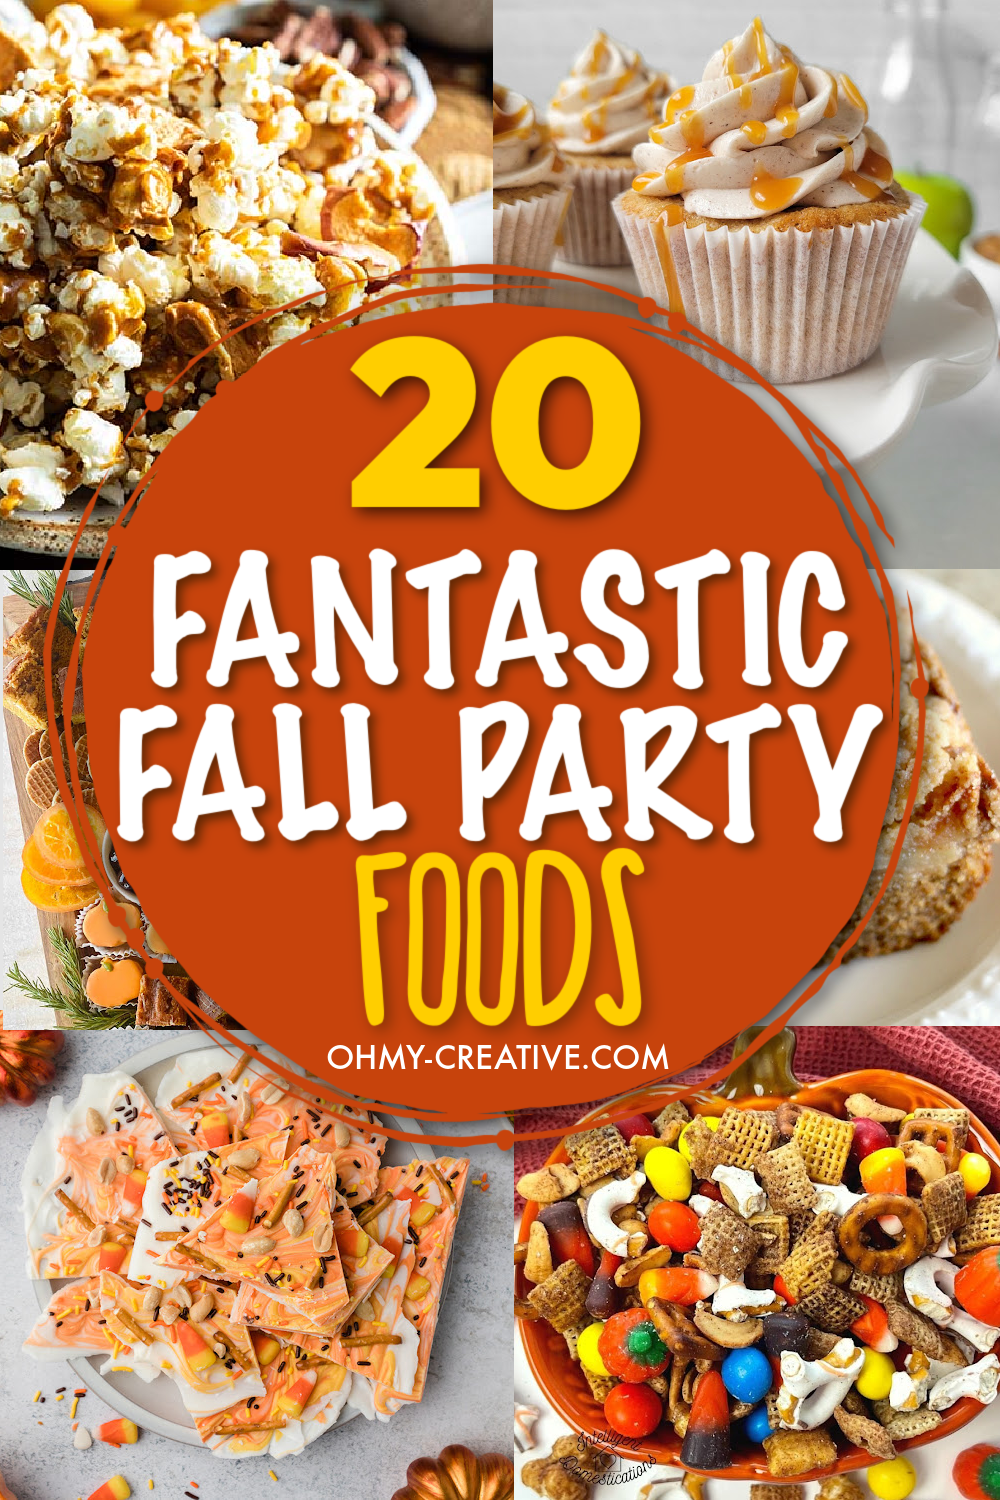 A collage of delicious fall party foods